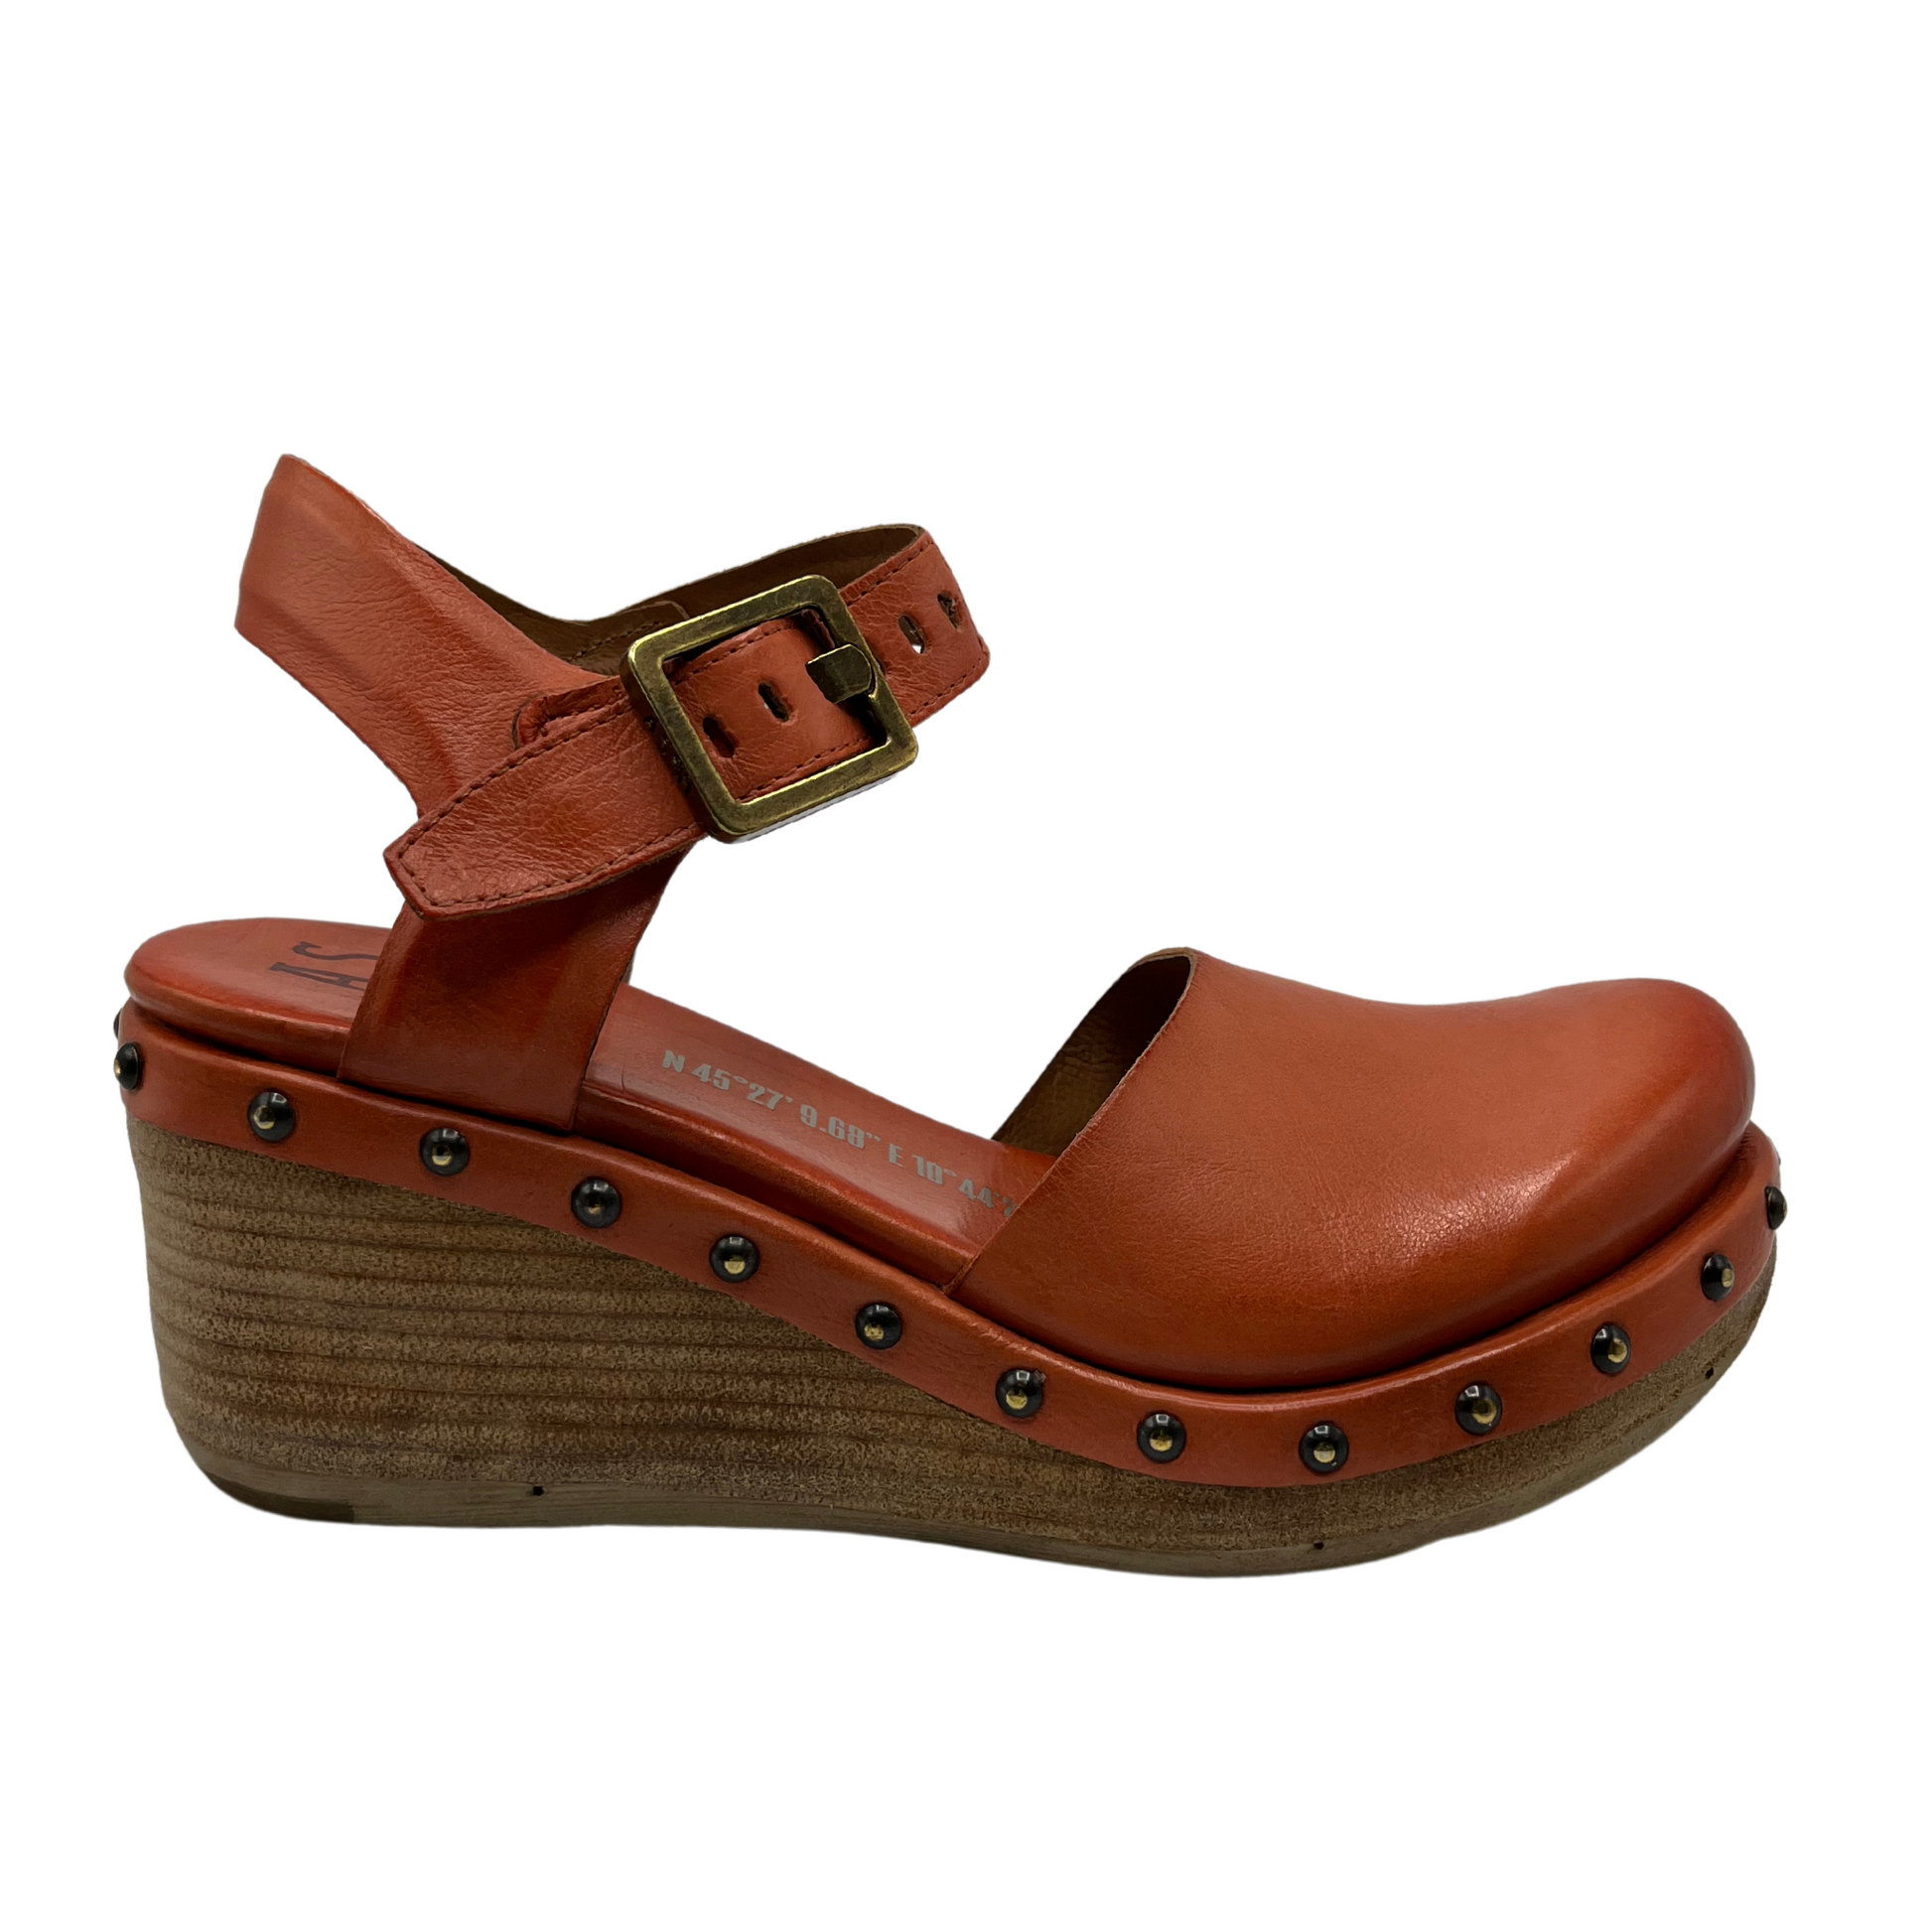 Right facing view of orange and tan wedge heel with closed toe and metal studs